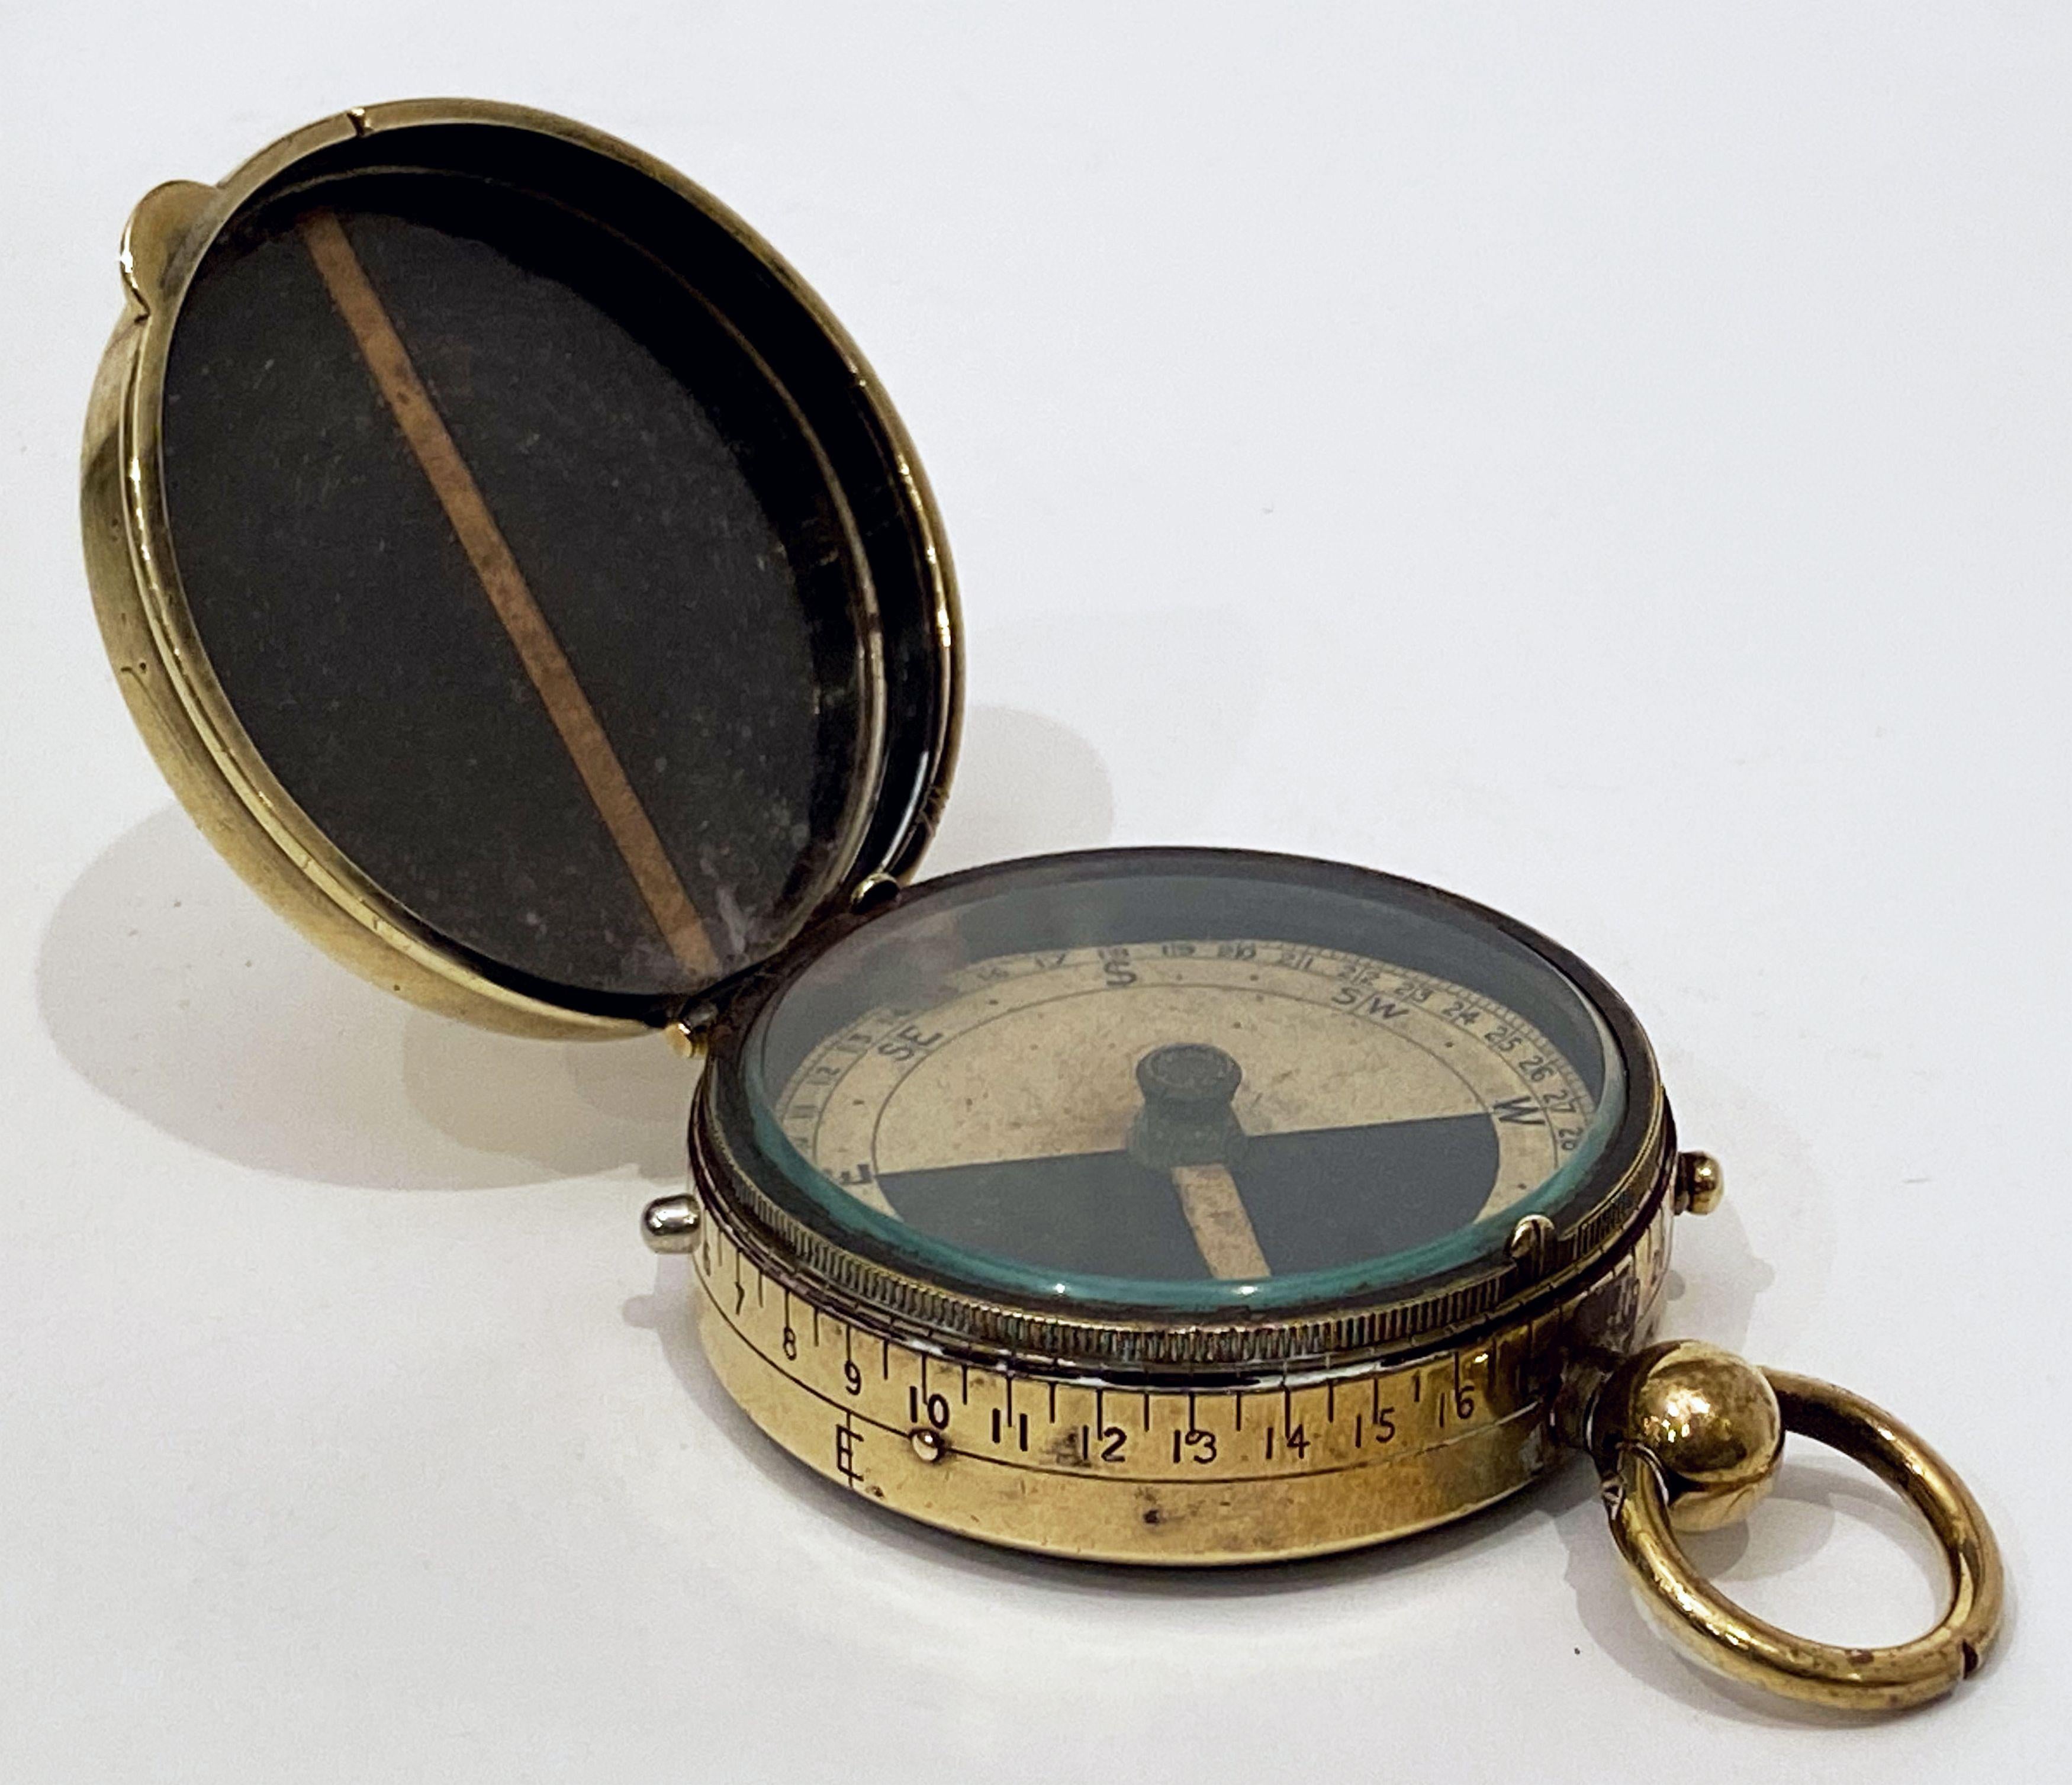 A working military officer's marching or sighting compass of heavy brass from World War One, an excellent original example of the Cbynite Radium Compass.
Featuring a brass case and mounted with a lanyard ring.
The glass faces and numbered brass